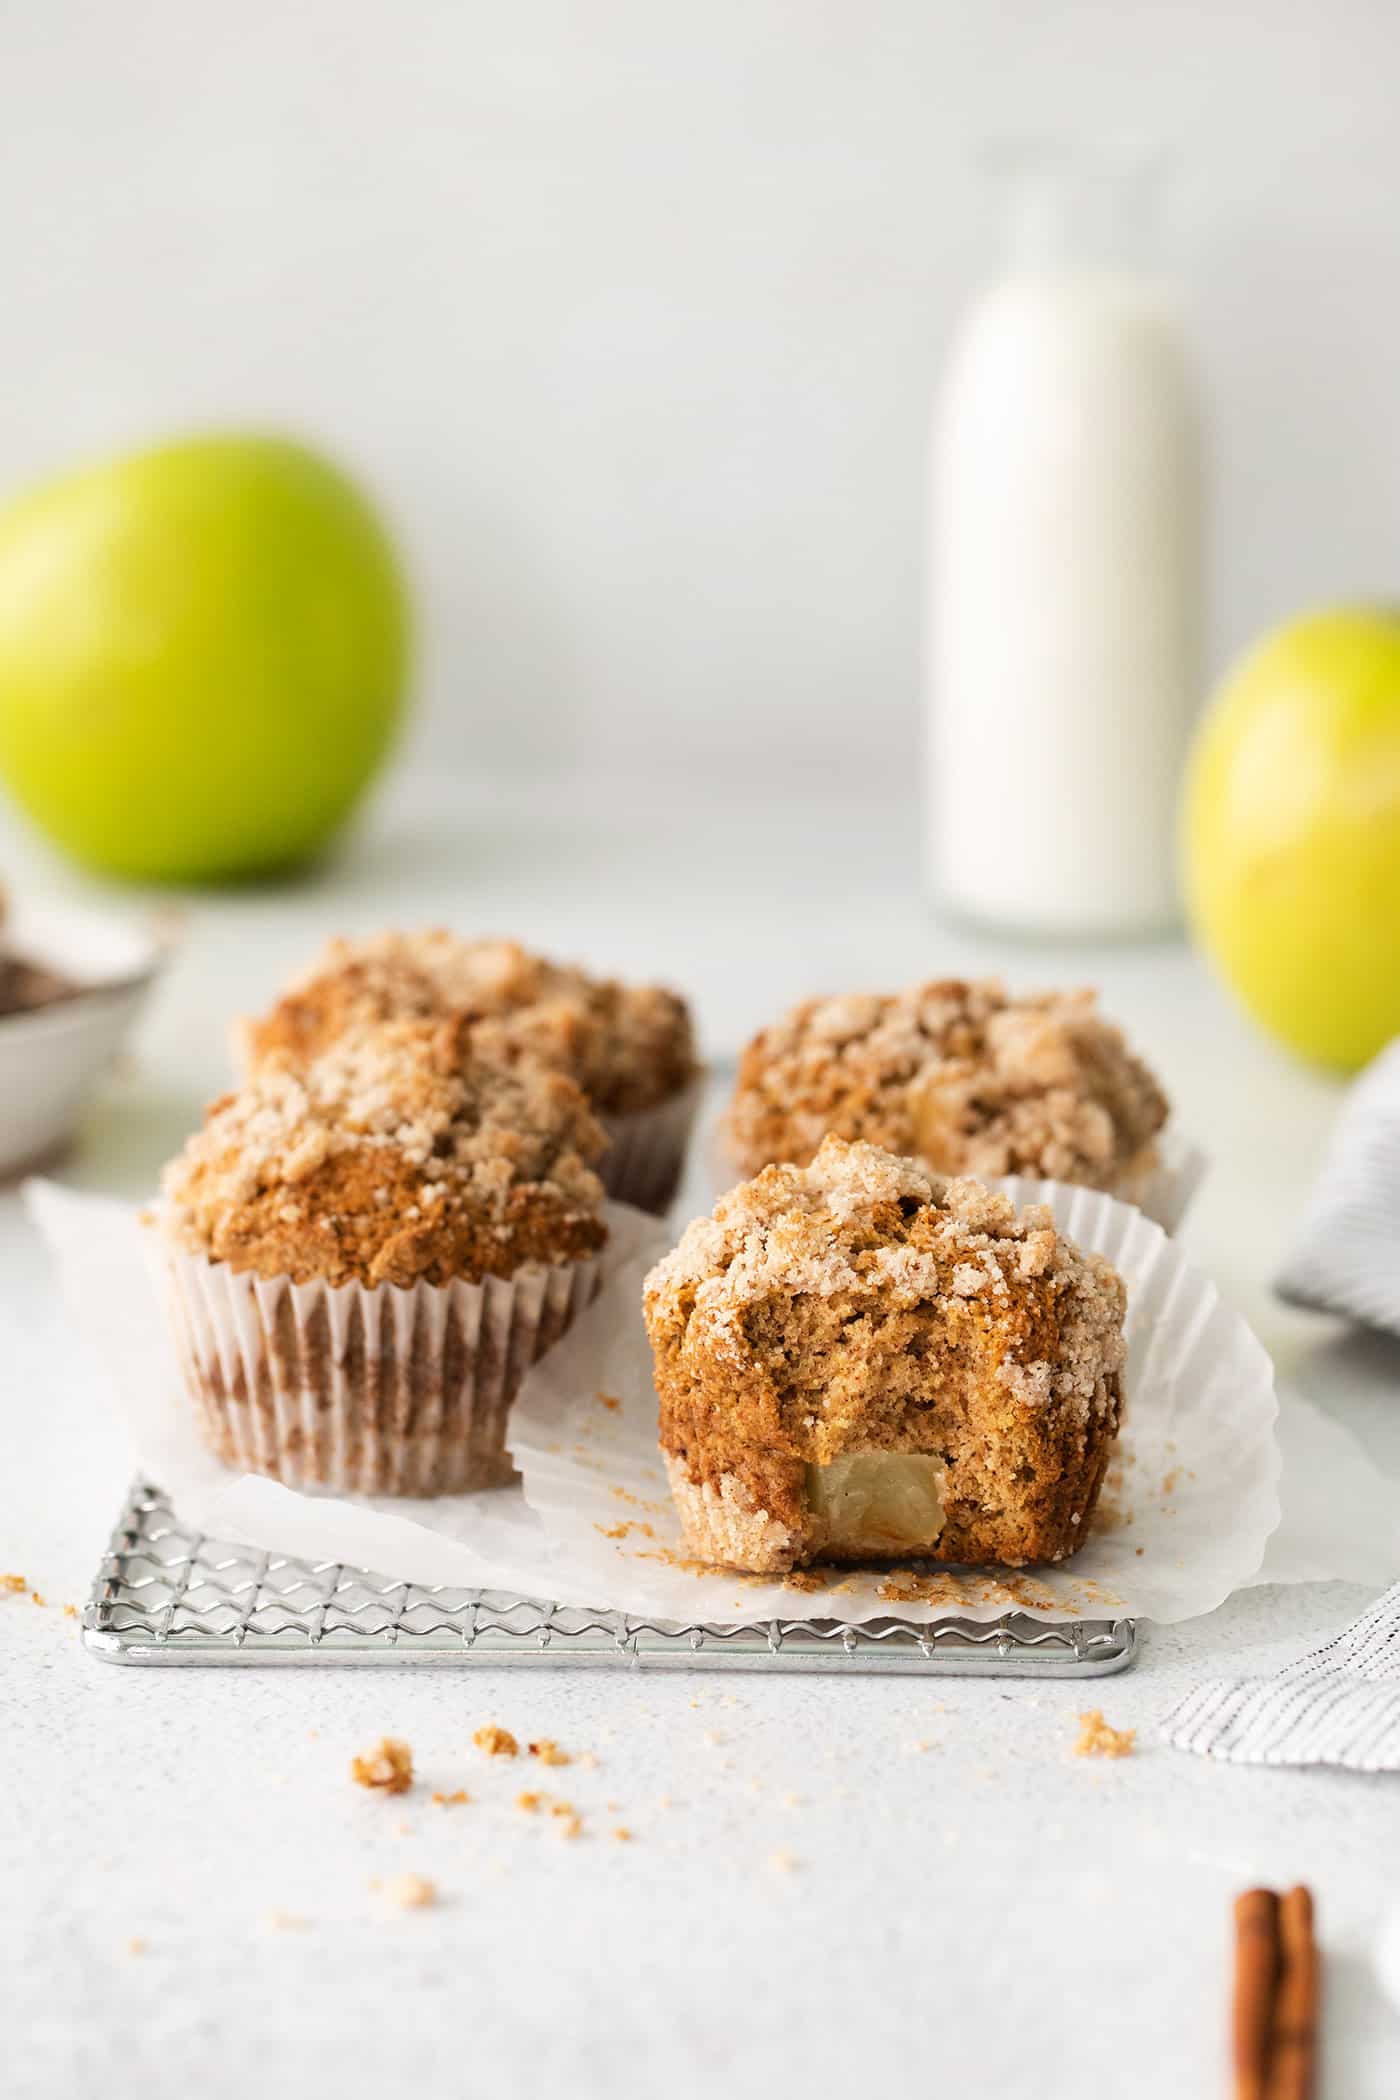 Four muffins with cinnamon sugar topping